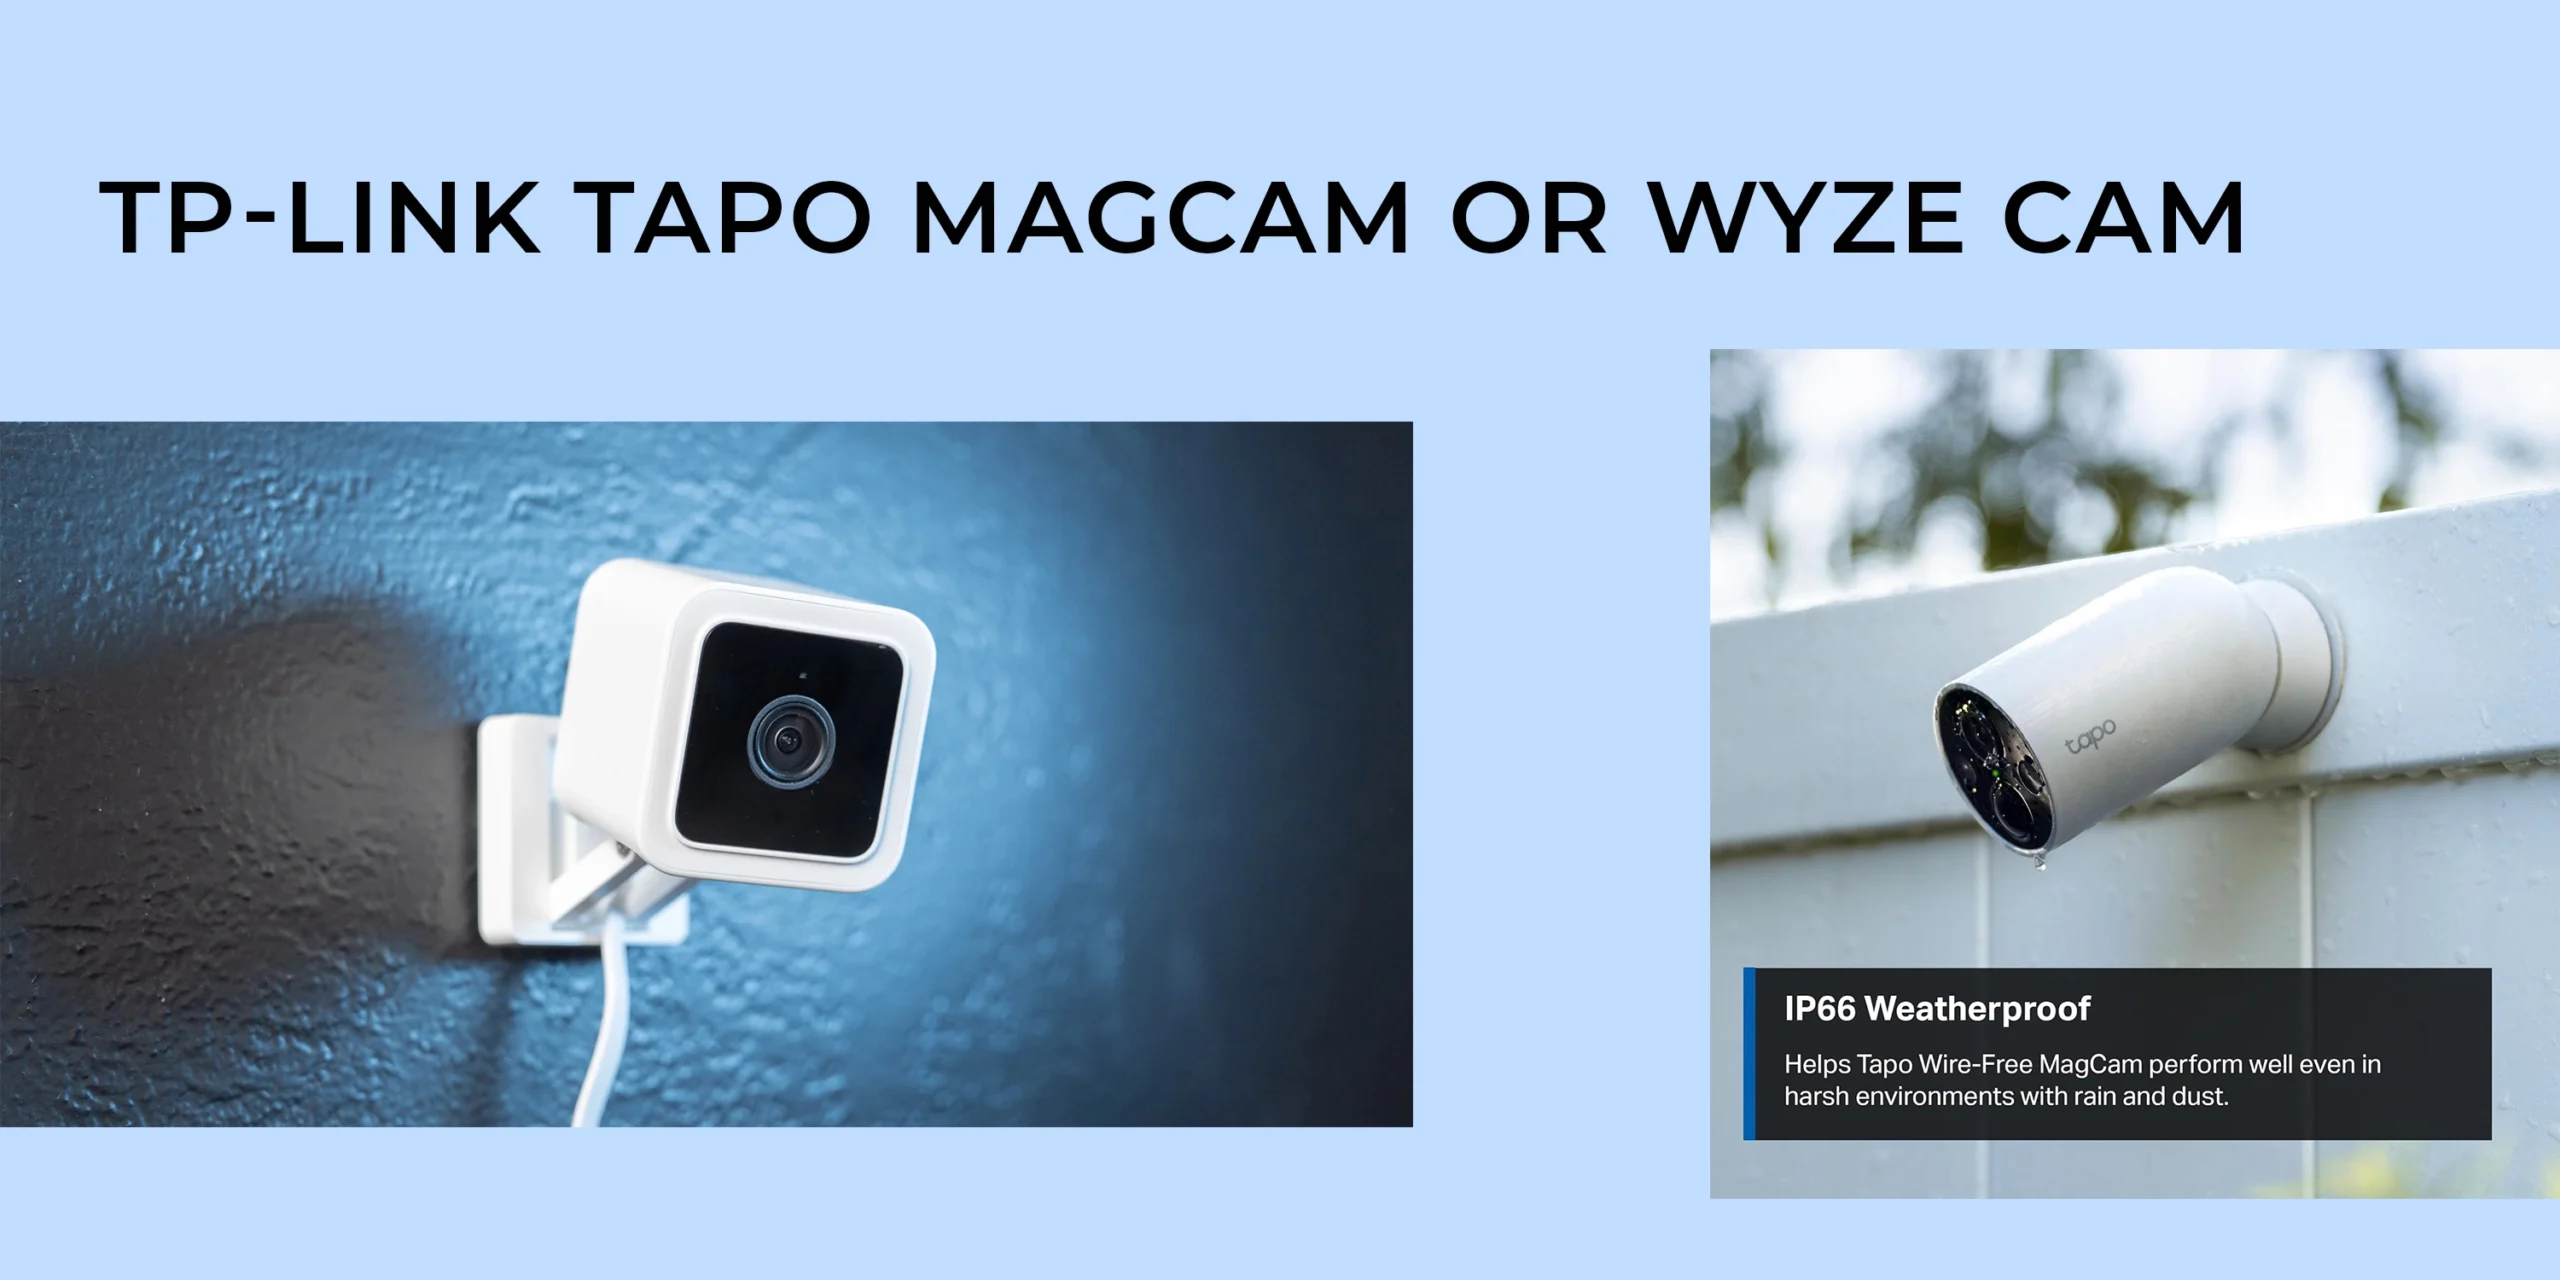 TP-Link Tapo Magcam or Wyze Cam V3: Which is Better for Home Security?